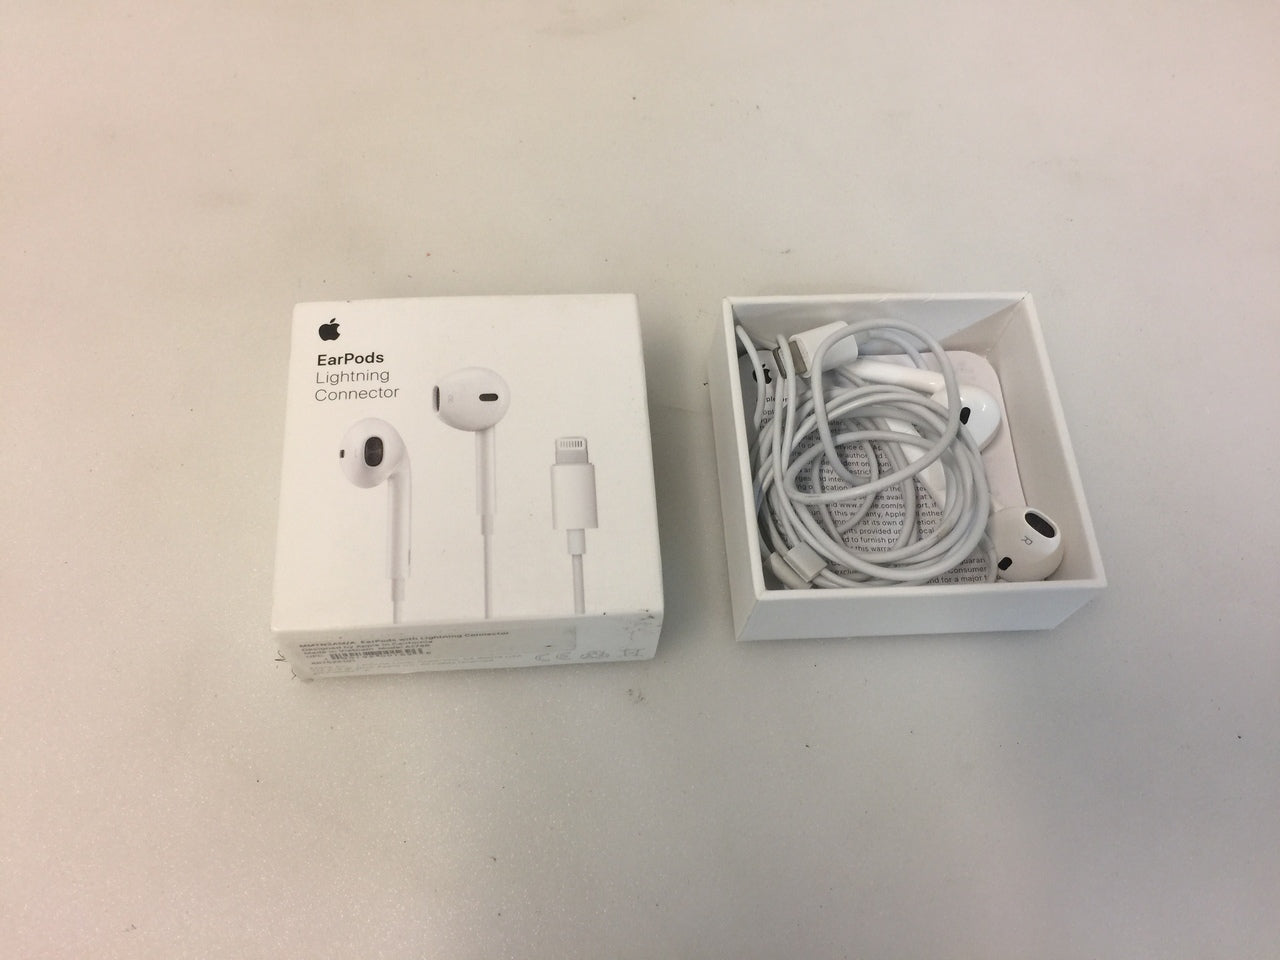 Apple EarPods with Lightning Connector In Ear Canal Headset A1748 – New 